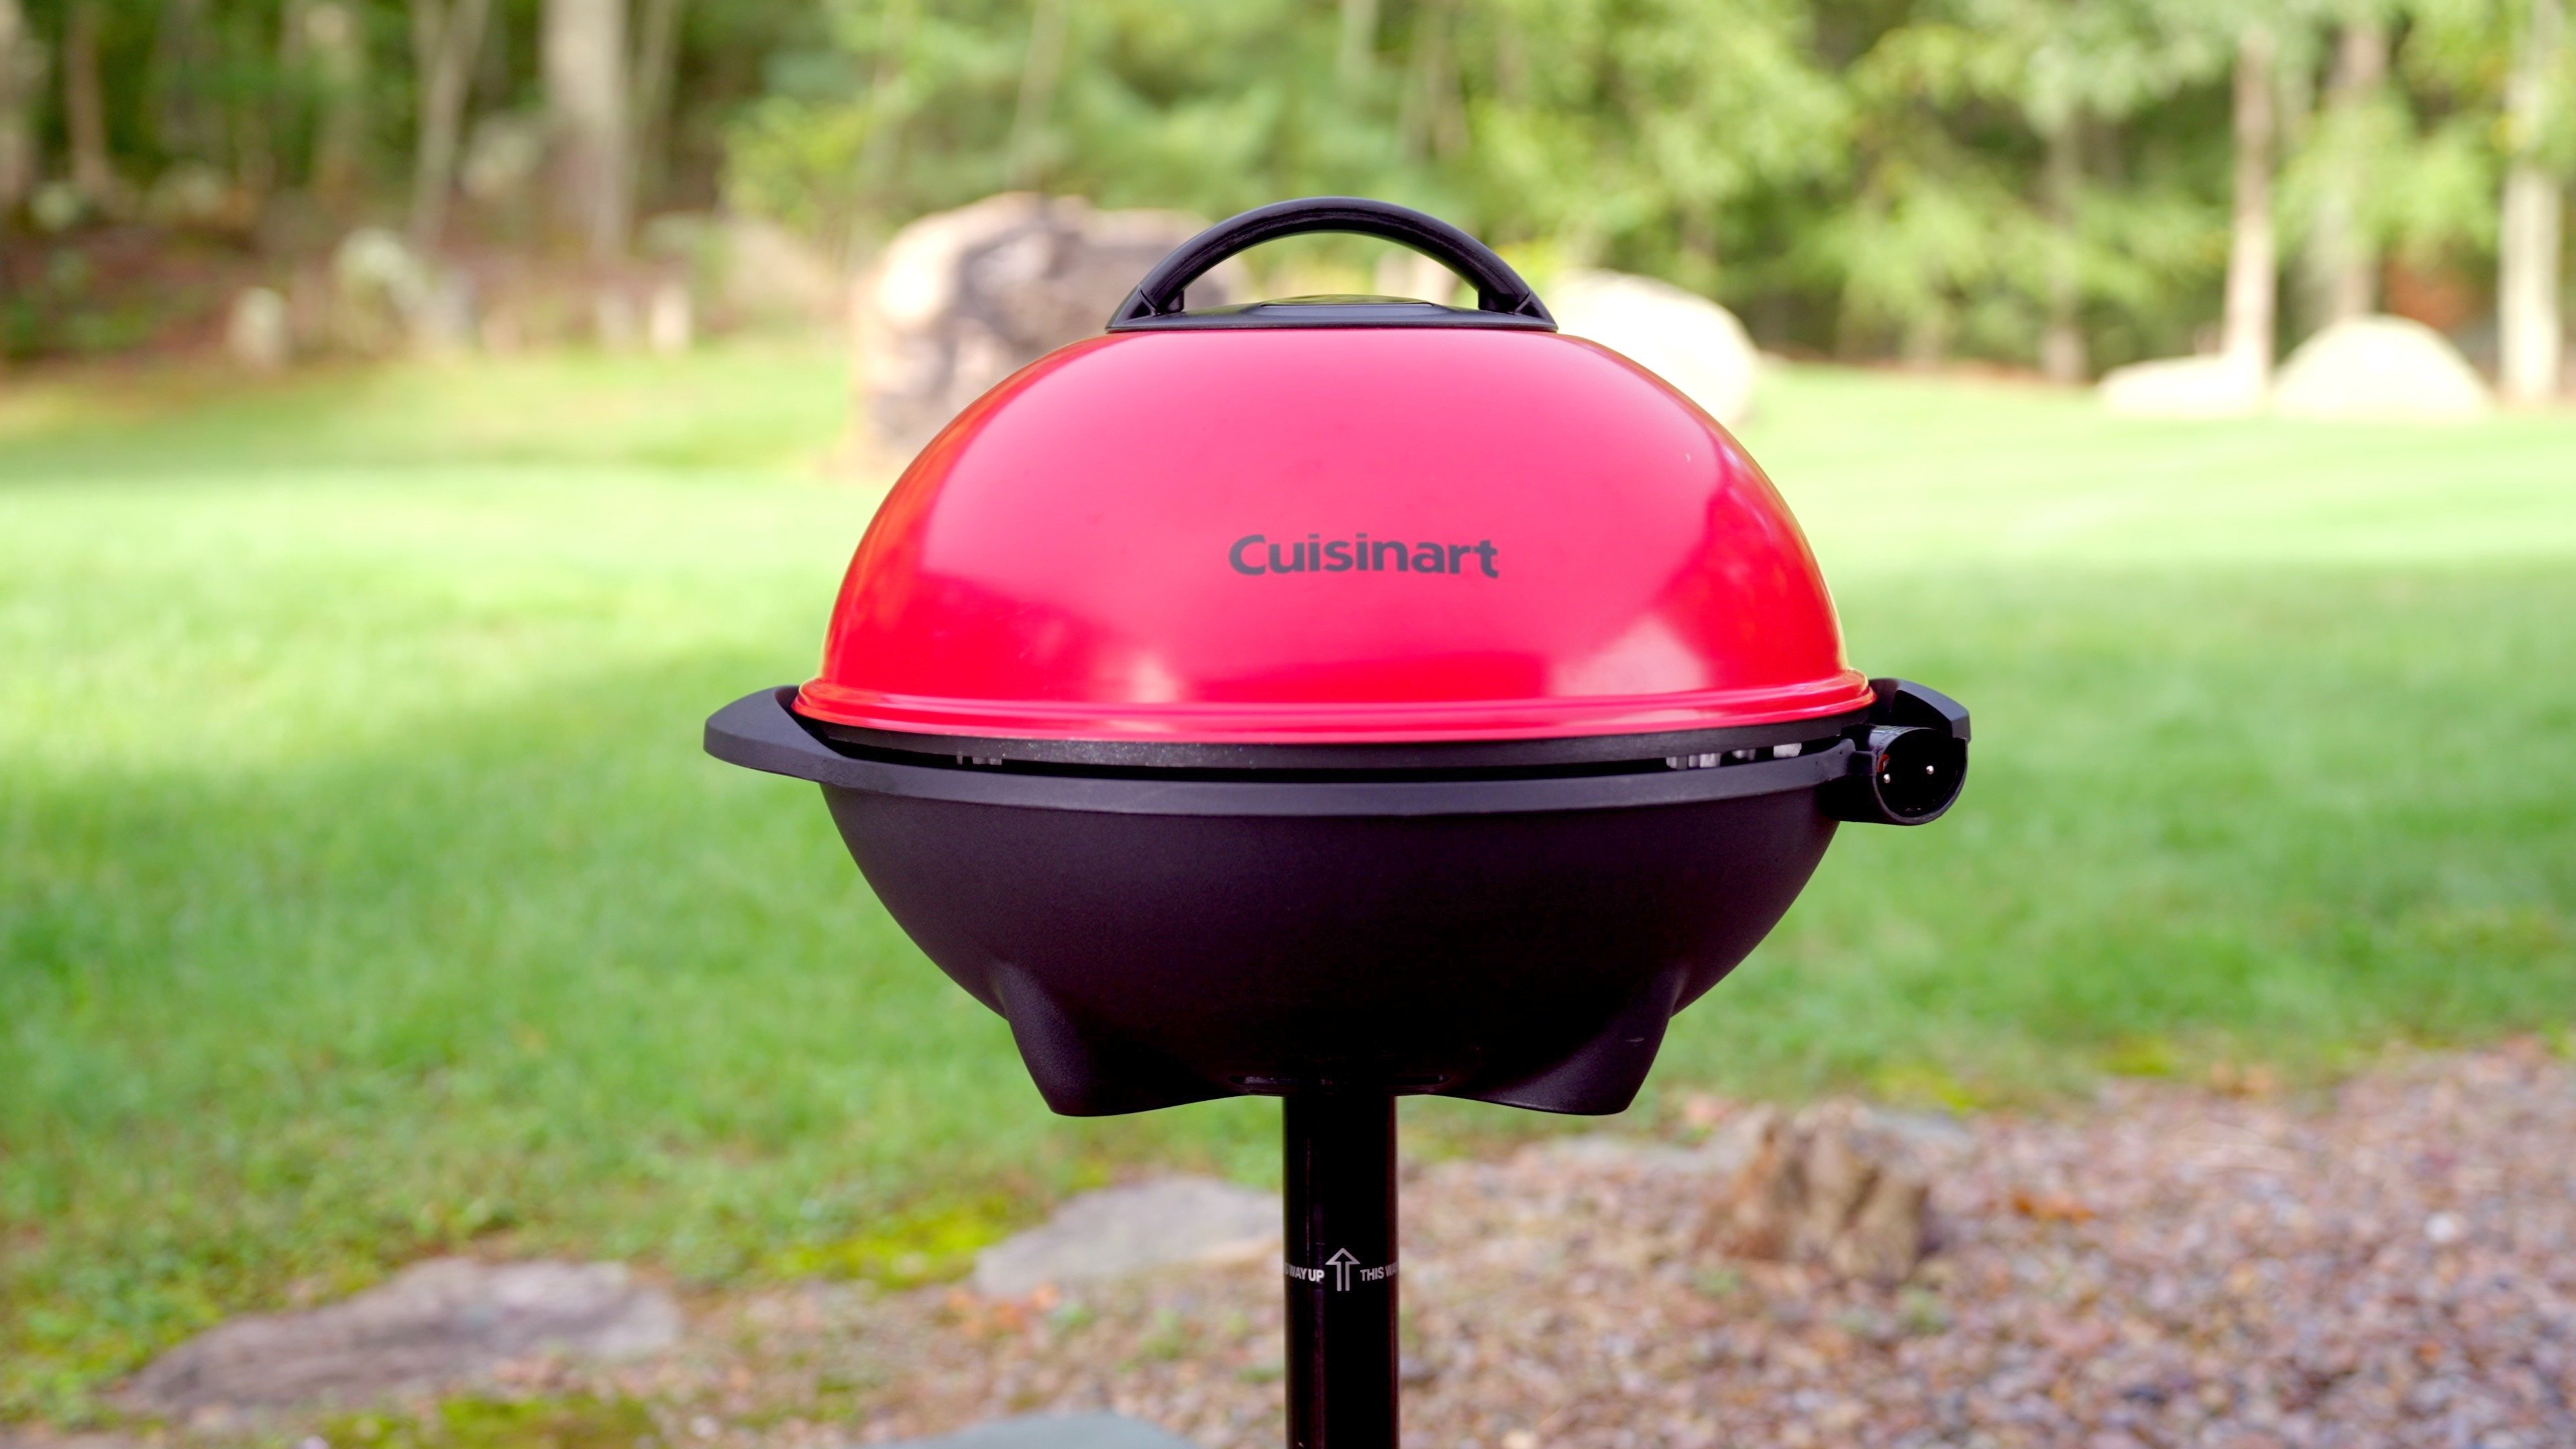 Cuisinart 15 in. Stainless Steel Nonstick Grill Pan in Red with